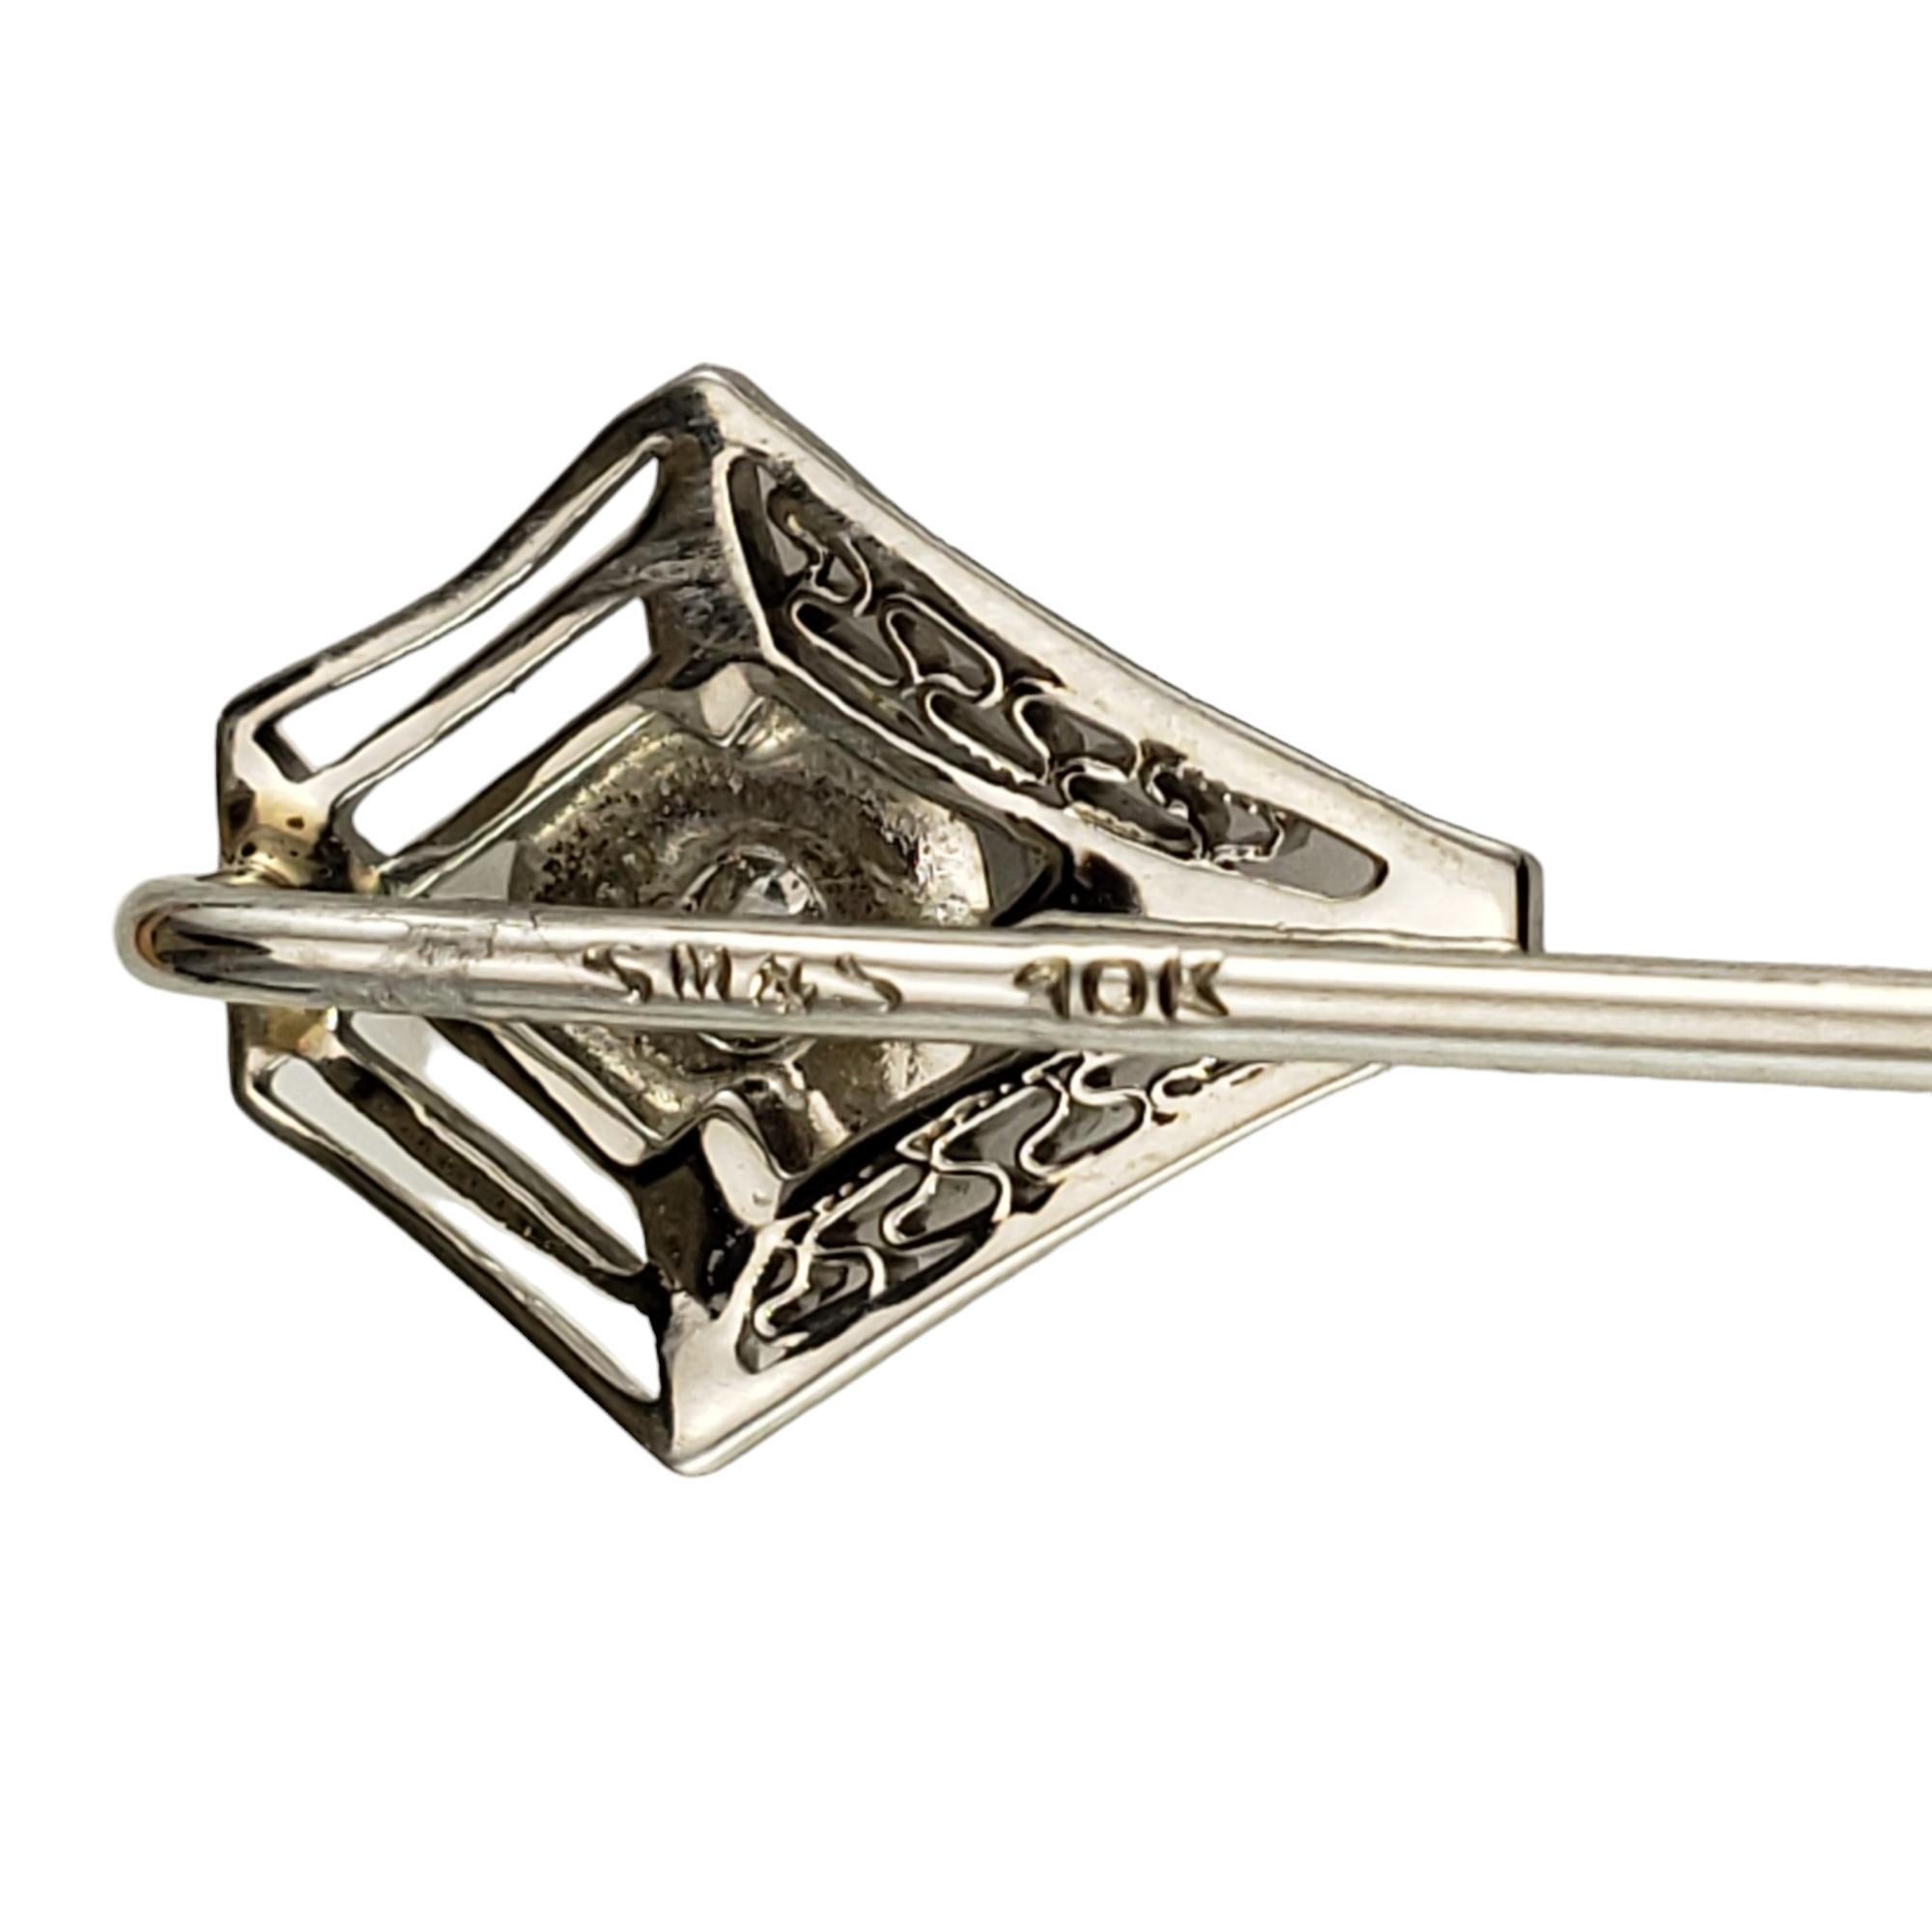 Women's 10K White Gold and Diamond Stick Pin #16374 For Sale